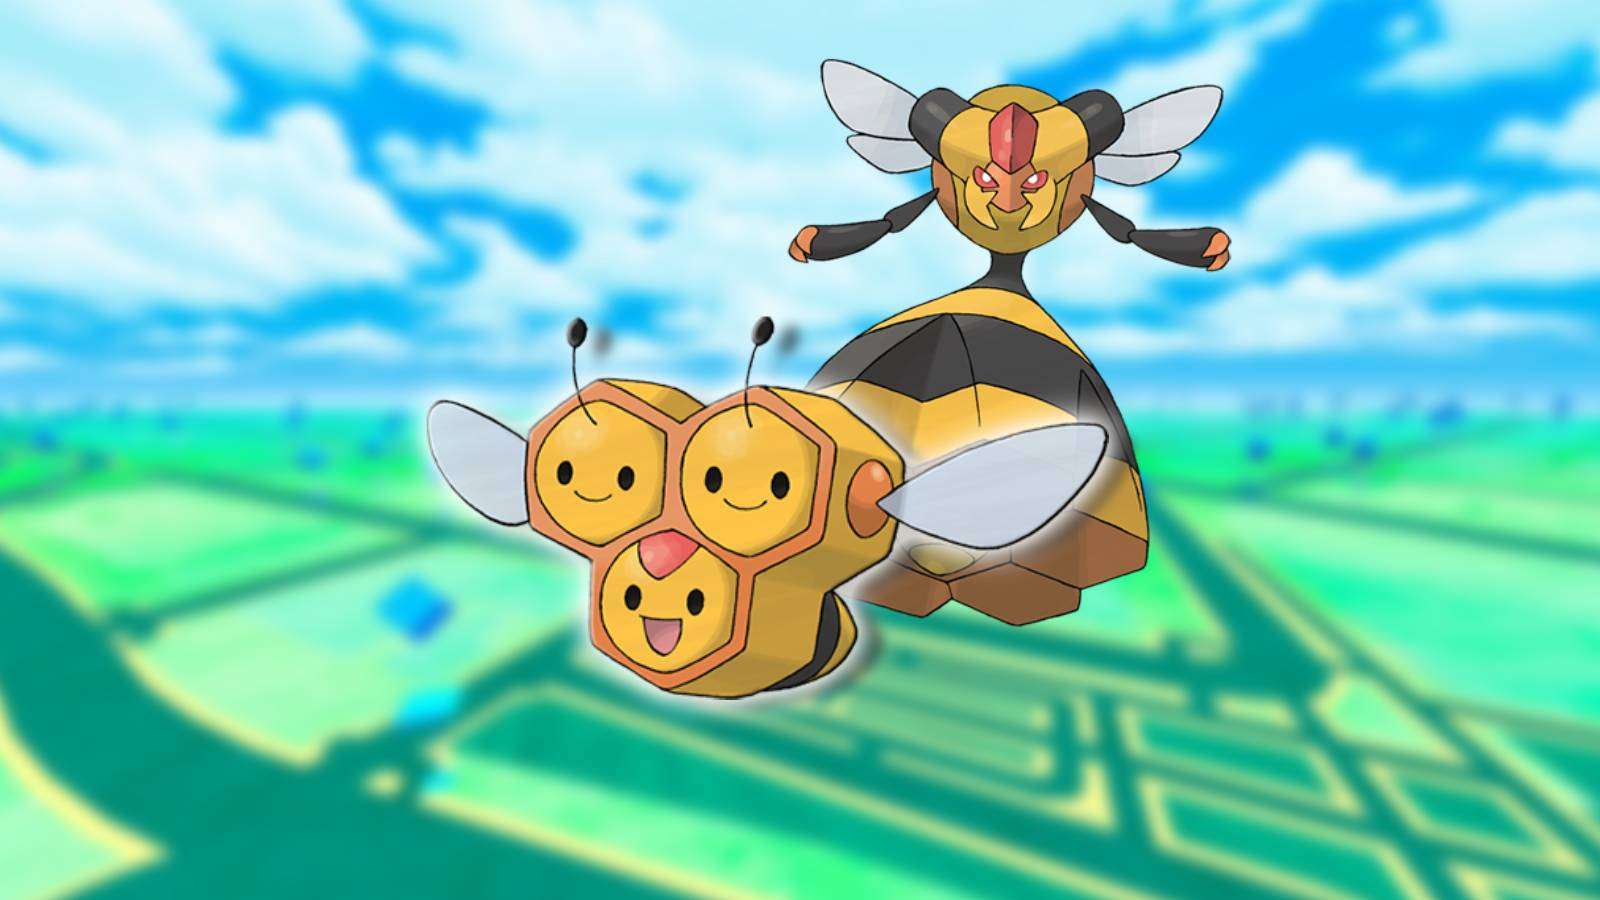 The Pokemon Combee and Vespiqueen appear beside each other against a blurred background